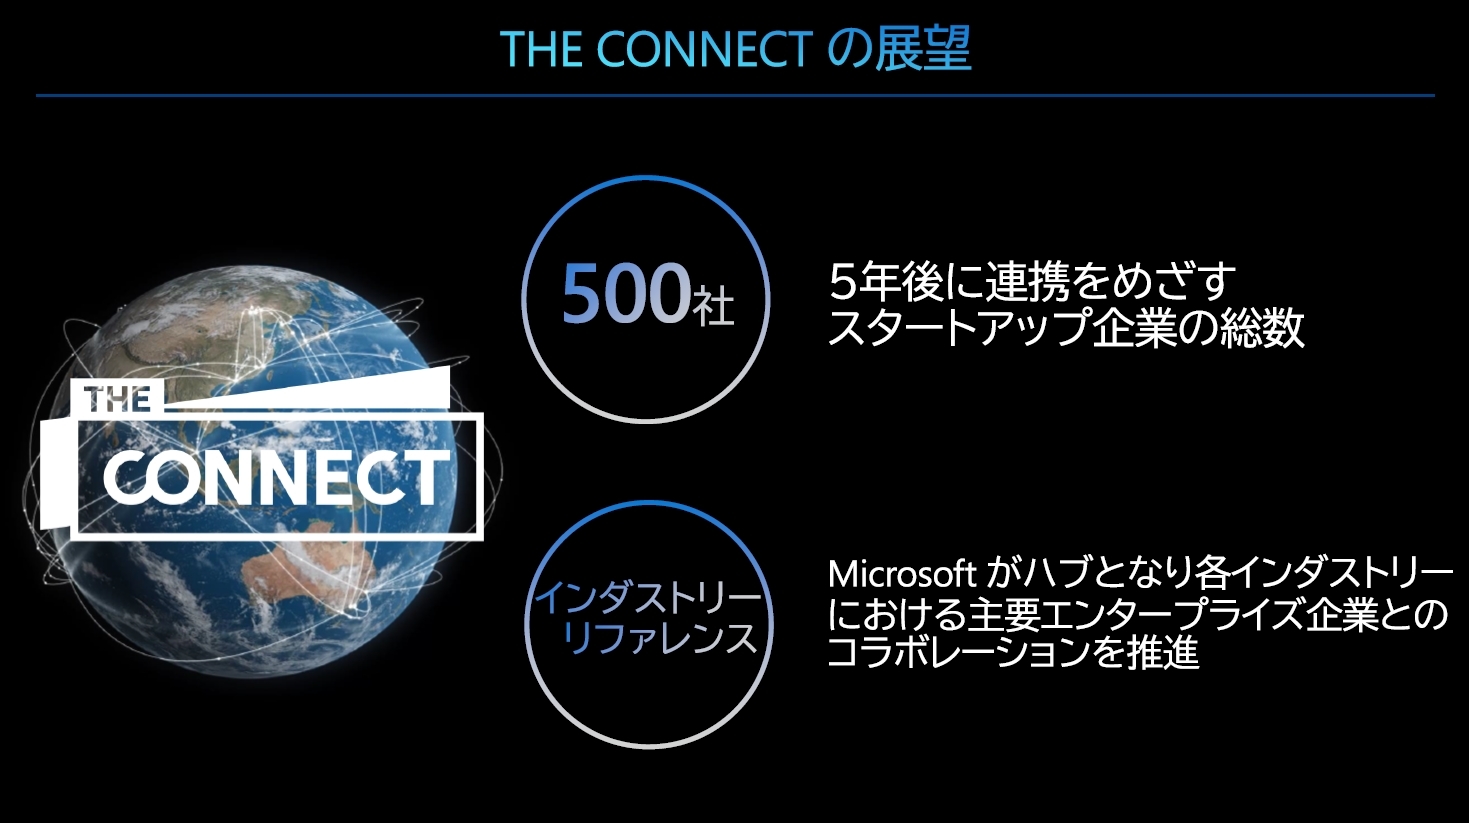 「The Connect」プログラムでの目標